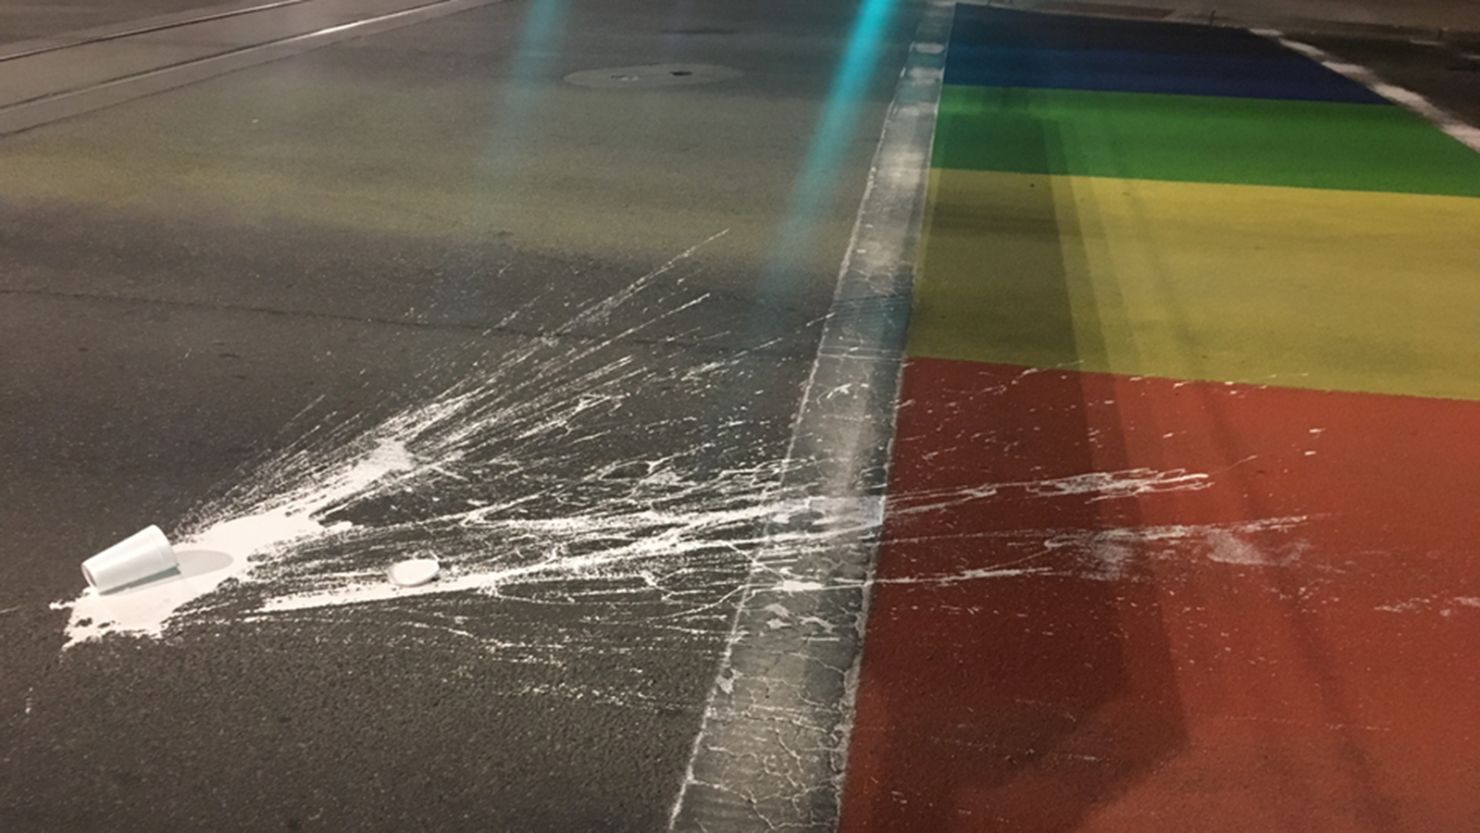 The Rainbow Crosswalks on Fourth Avenue in Tucson was damaged with white paint late Monday or early Tuesday morning.